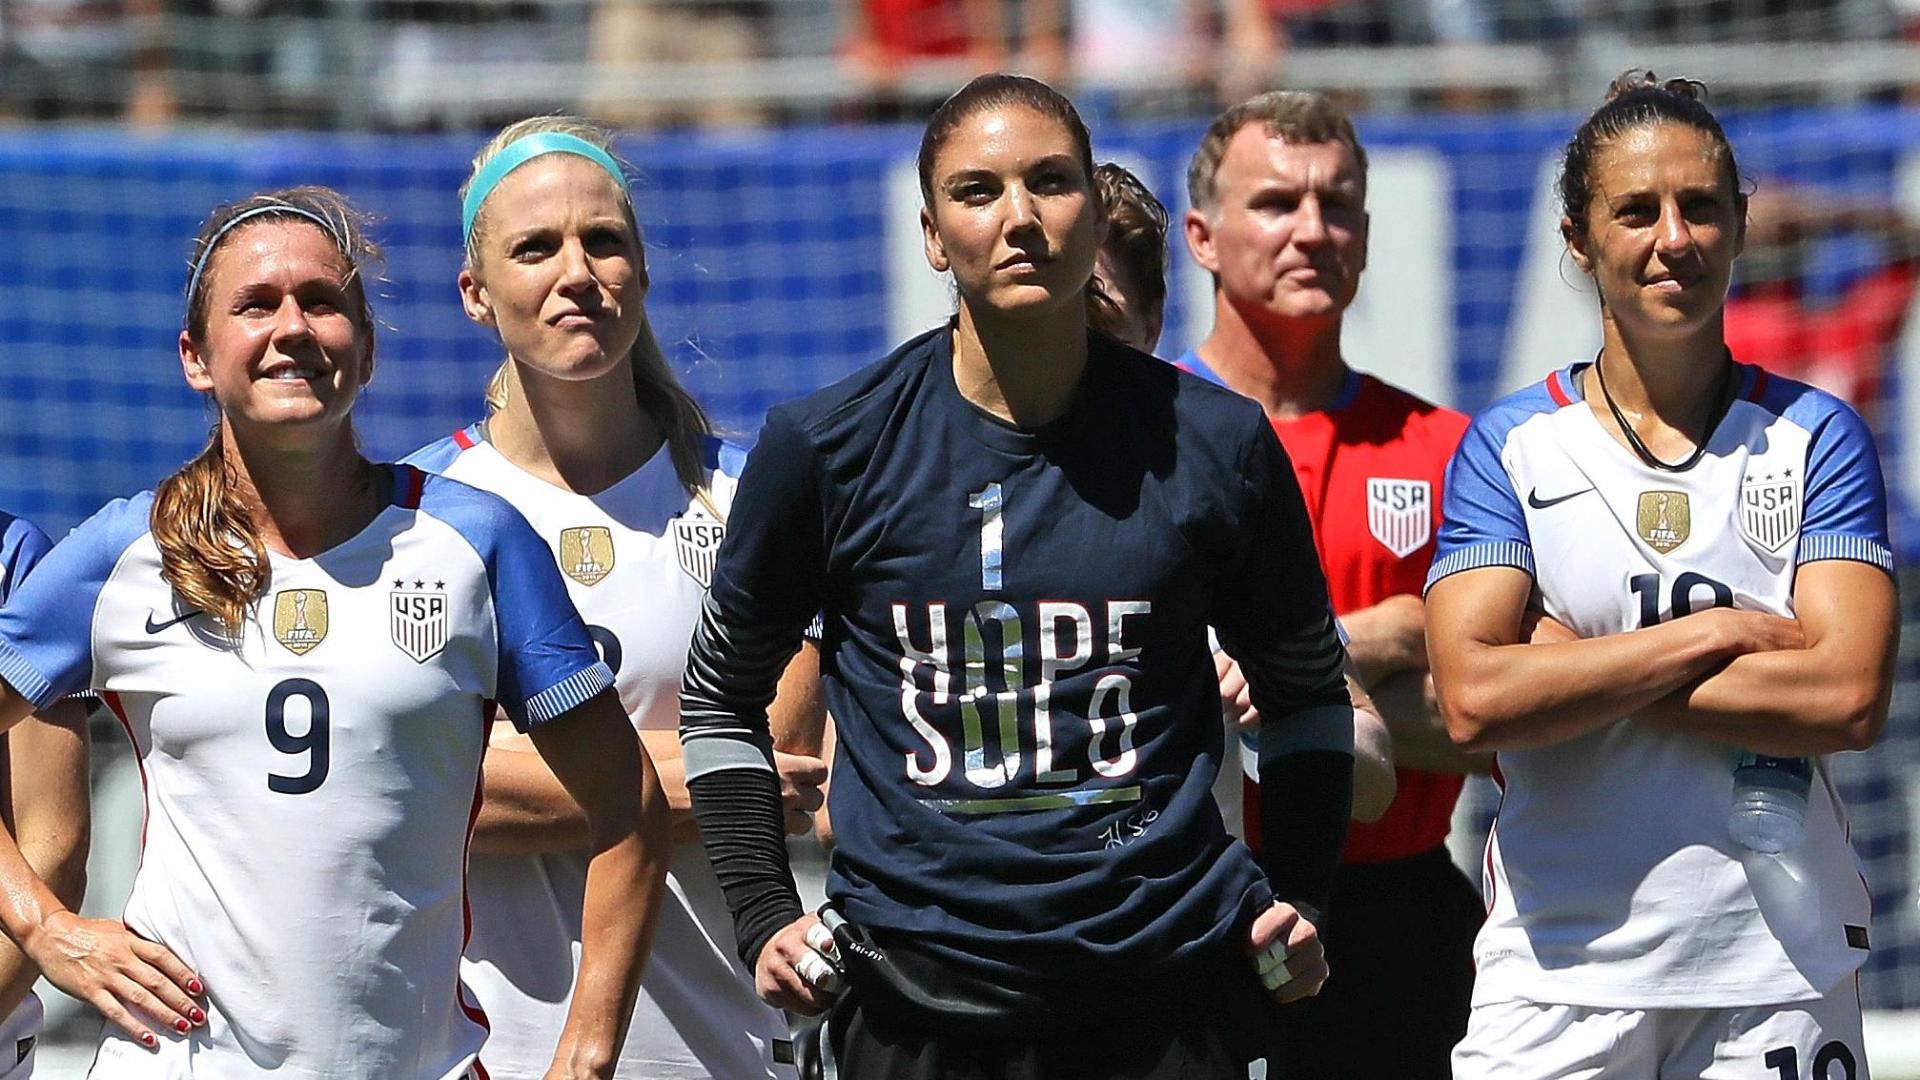 United States women's soccer team makes history but performance still